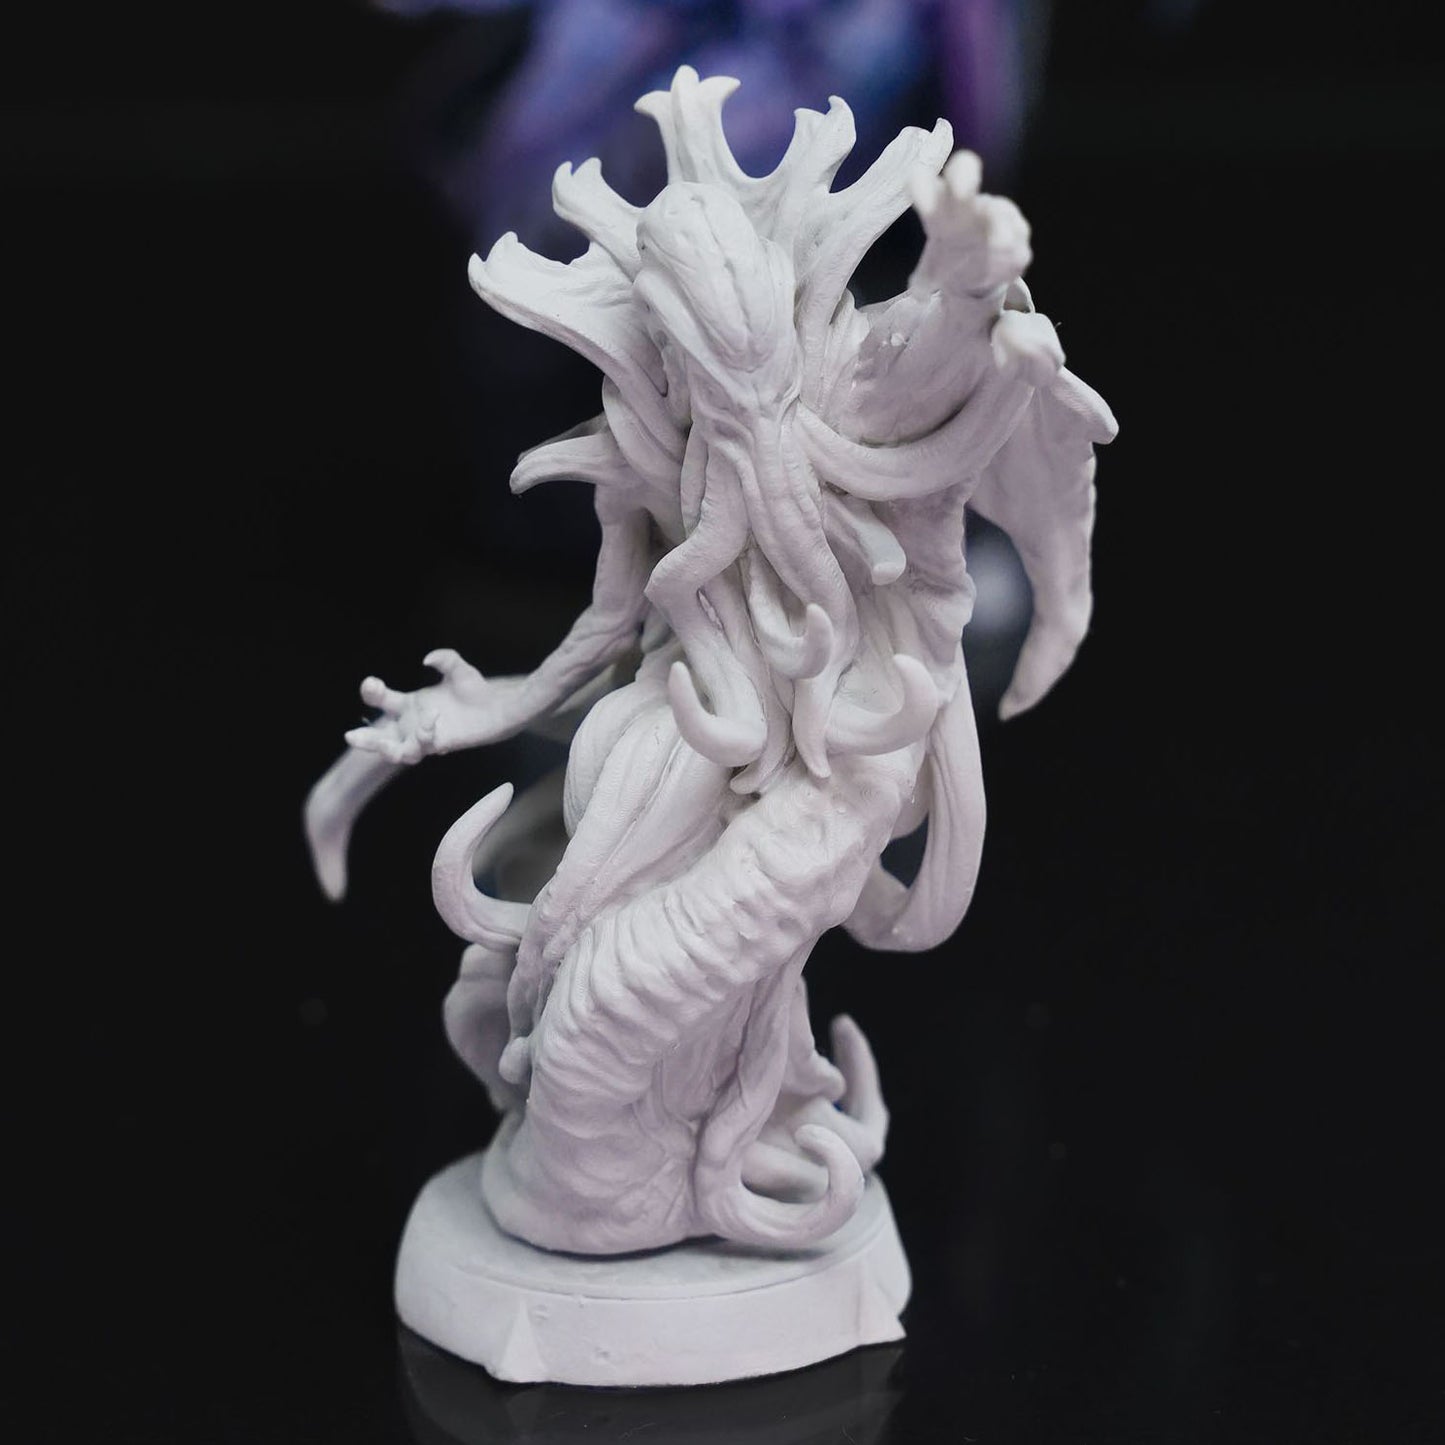 Mind Flayer - 32mm / 75mm Scale Miniature